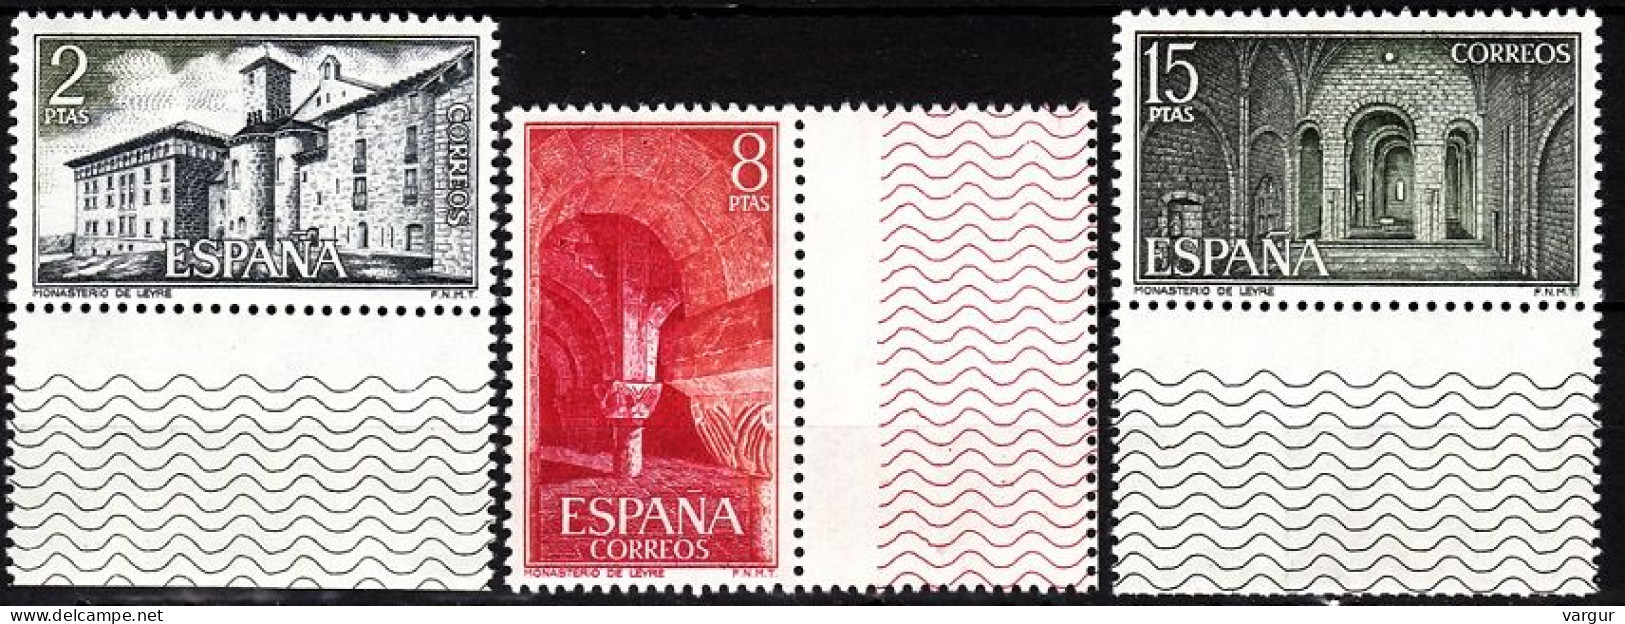 SPAIN 1974 ARCHITECTURE: Castles And Abbeys. Complete, MNH - Kastelen